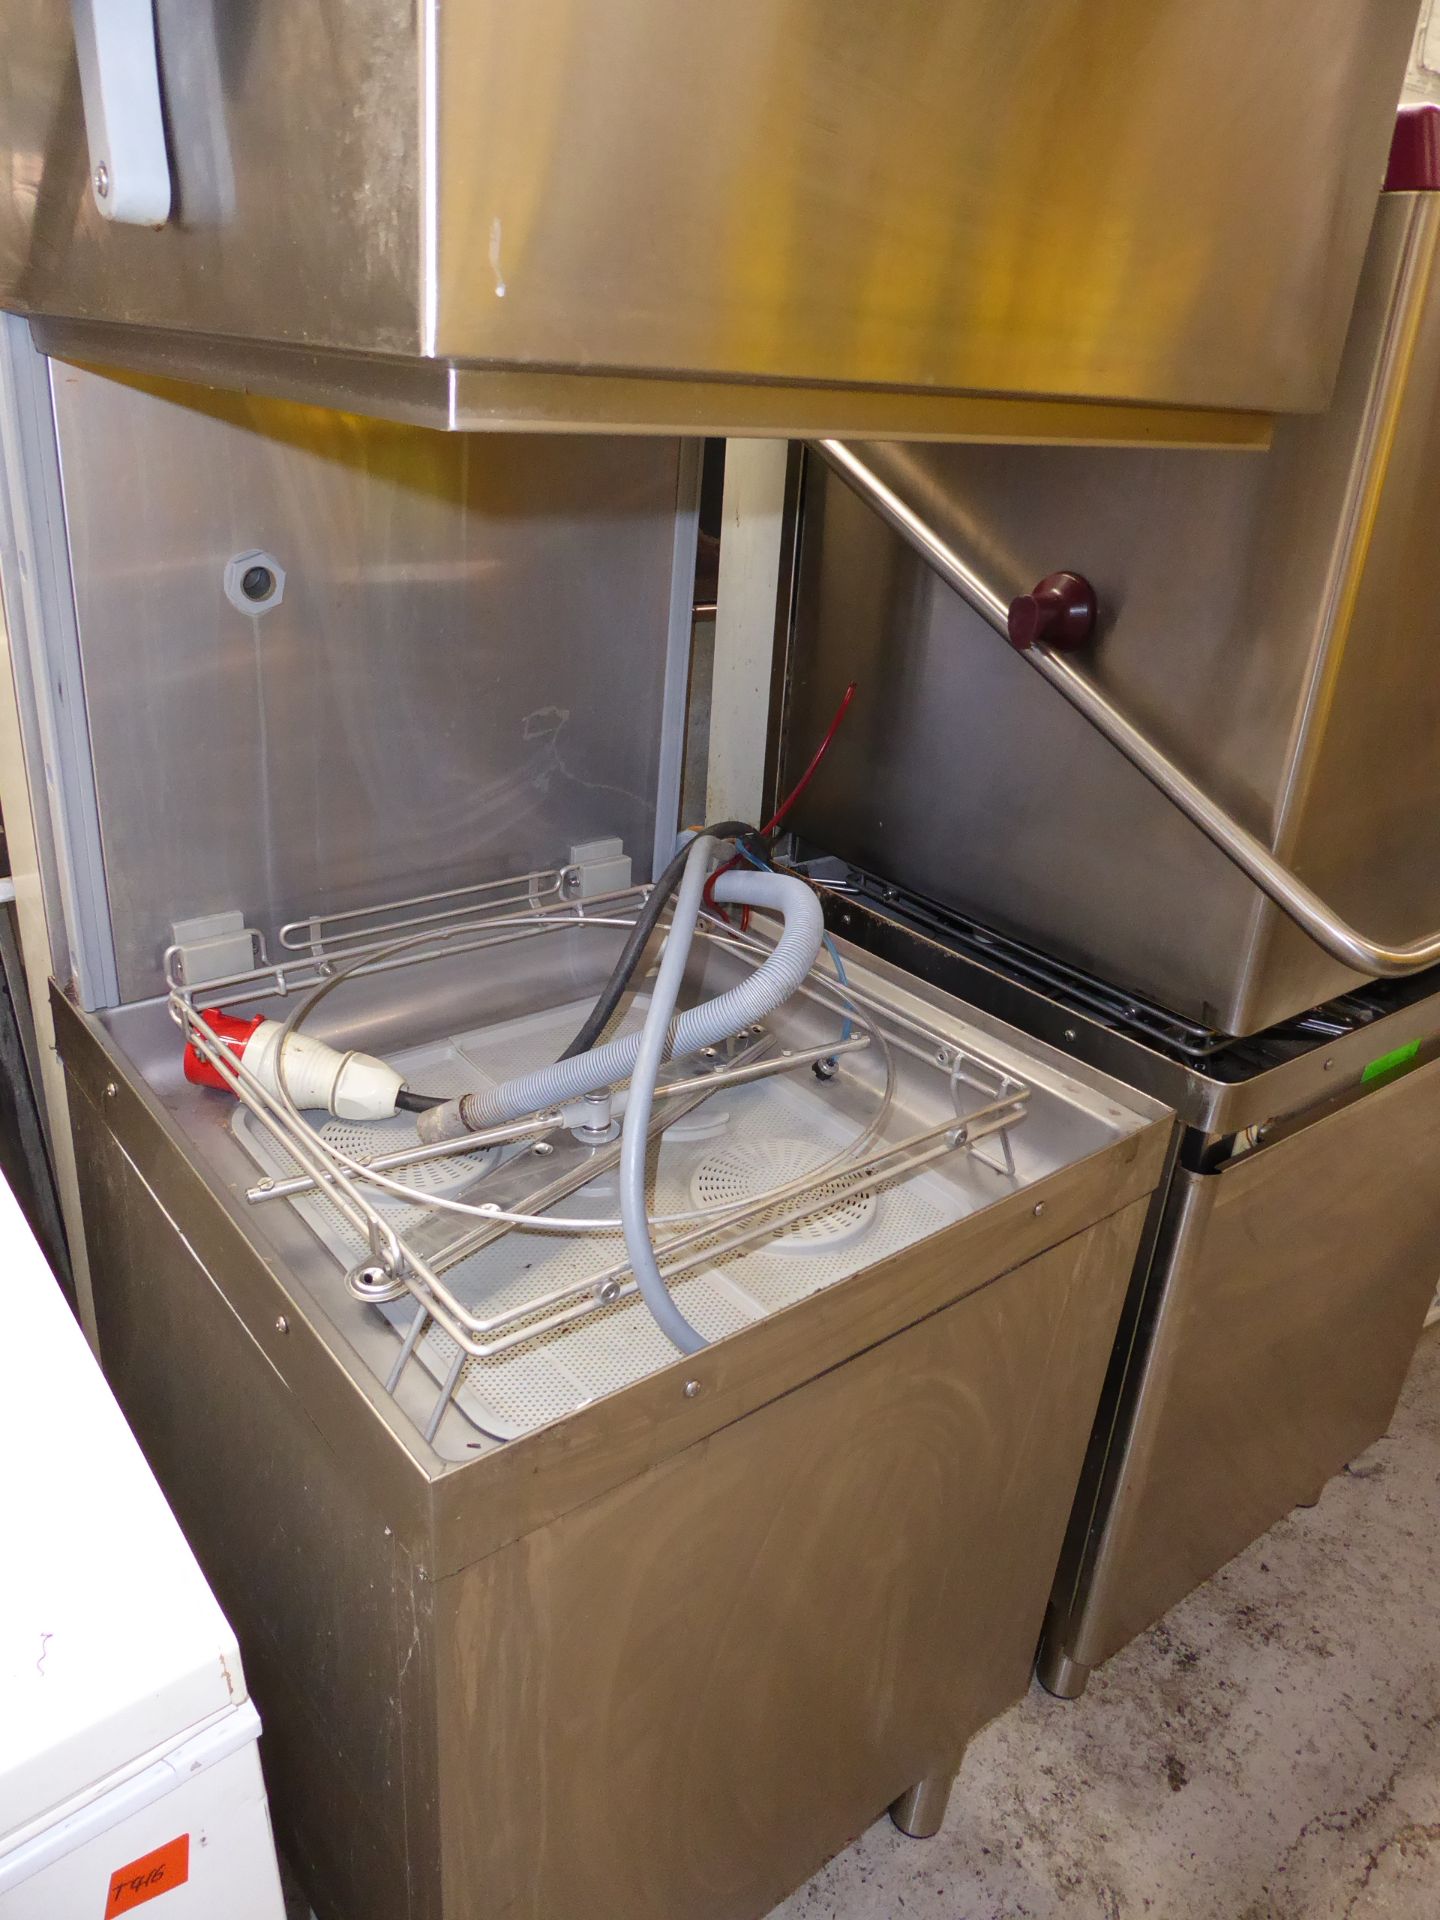 *Maidaid 2035WS pass through dishwasher - good condition, direct from national chain ( - Image 4 of 4